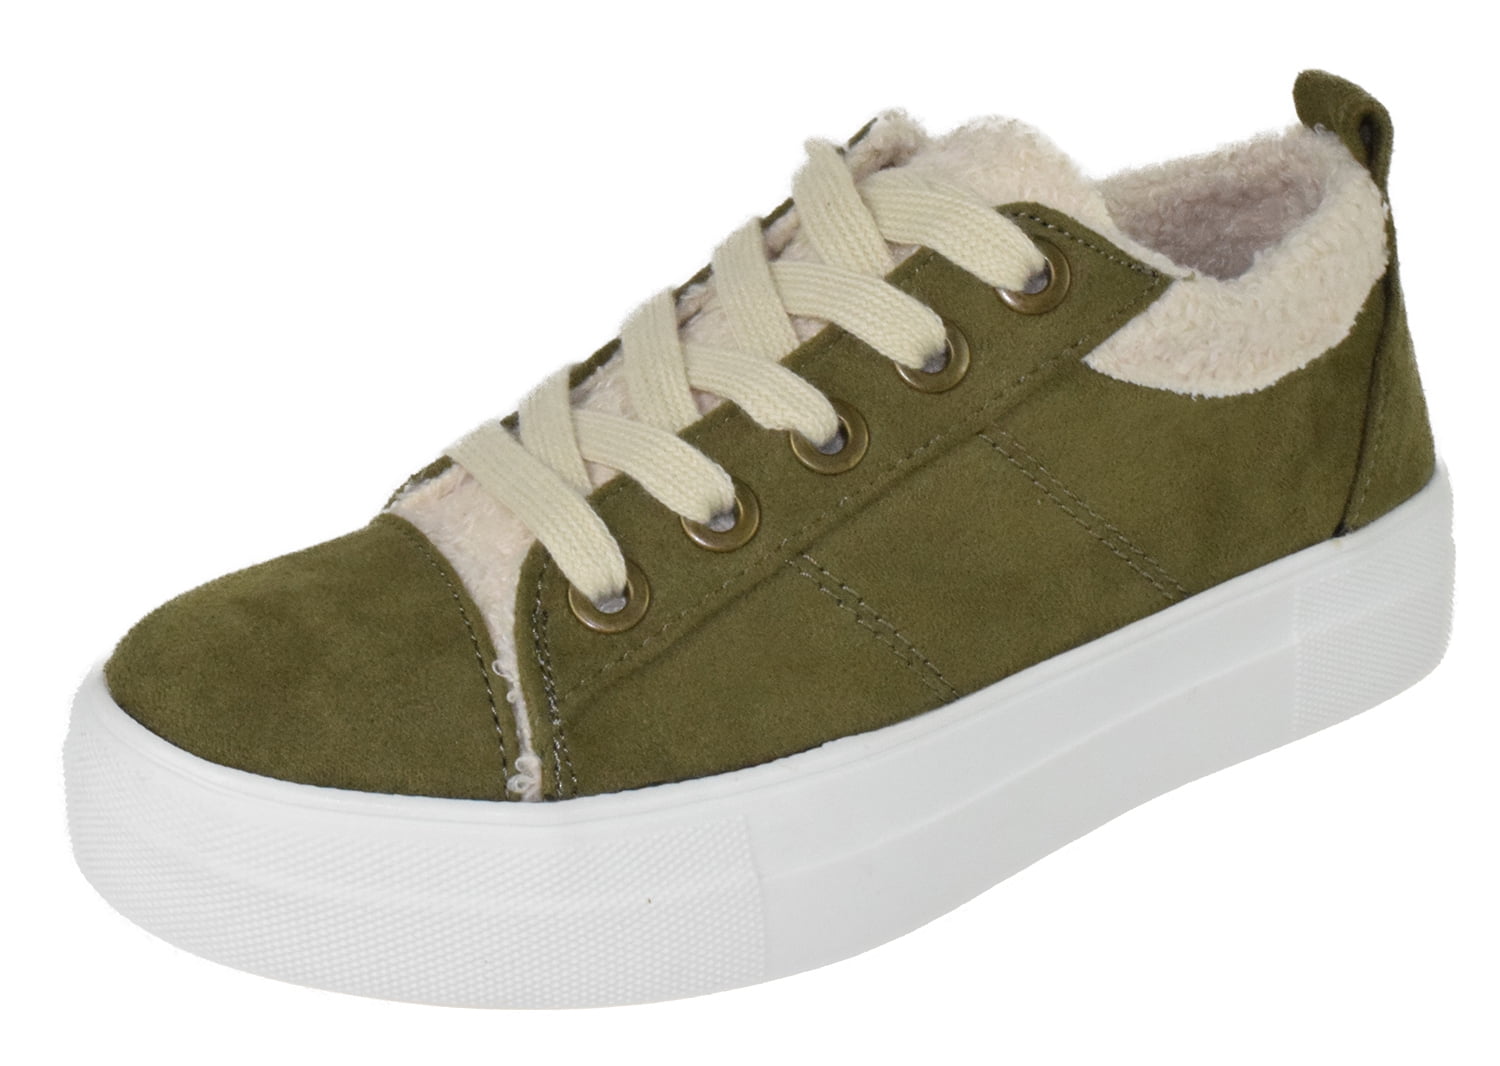 Soda Flat Women's Shoes Lace Up Loafers Casual Sneakers Synthetic Fur  Hidden Flatform ENDEAR-G Suede Khaki Green Olive 8